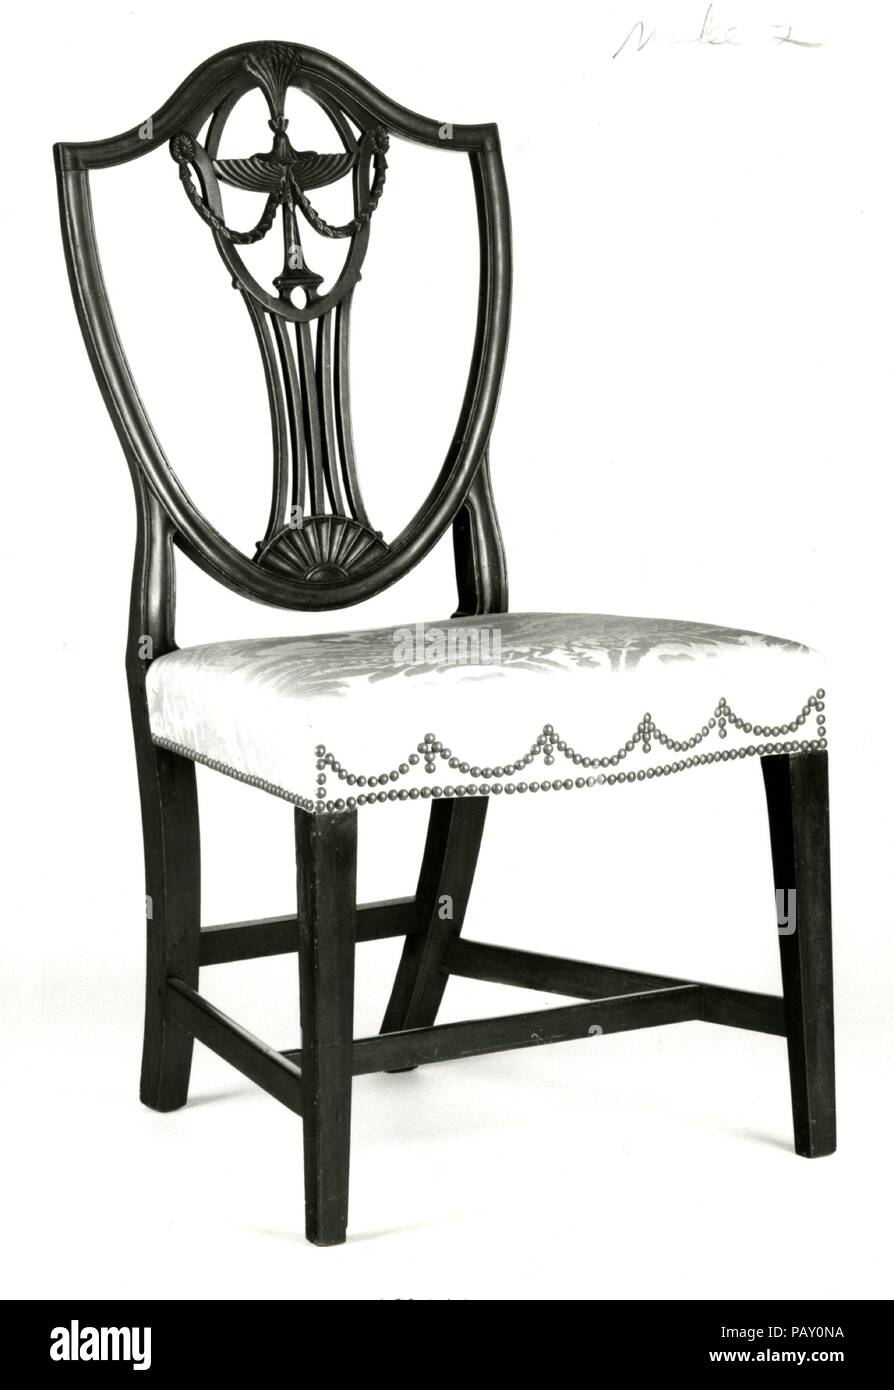 Side Chair. Culture: American. Dimensions: 39 1/4 x 21 1/4 x 20 3/4 in. (99.7 x 54 x 52.7 cm). Date: 1795-1805. Museum: Metropolitan Museum of Art, New York, USA. Stock Photo